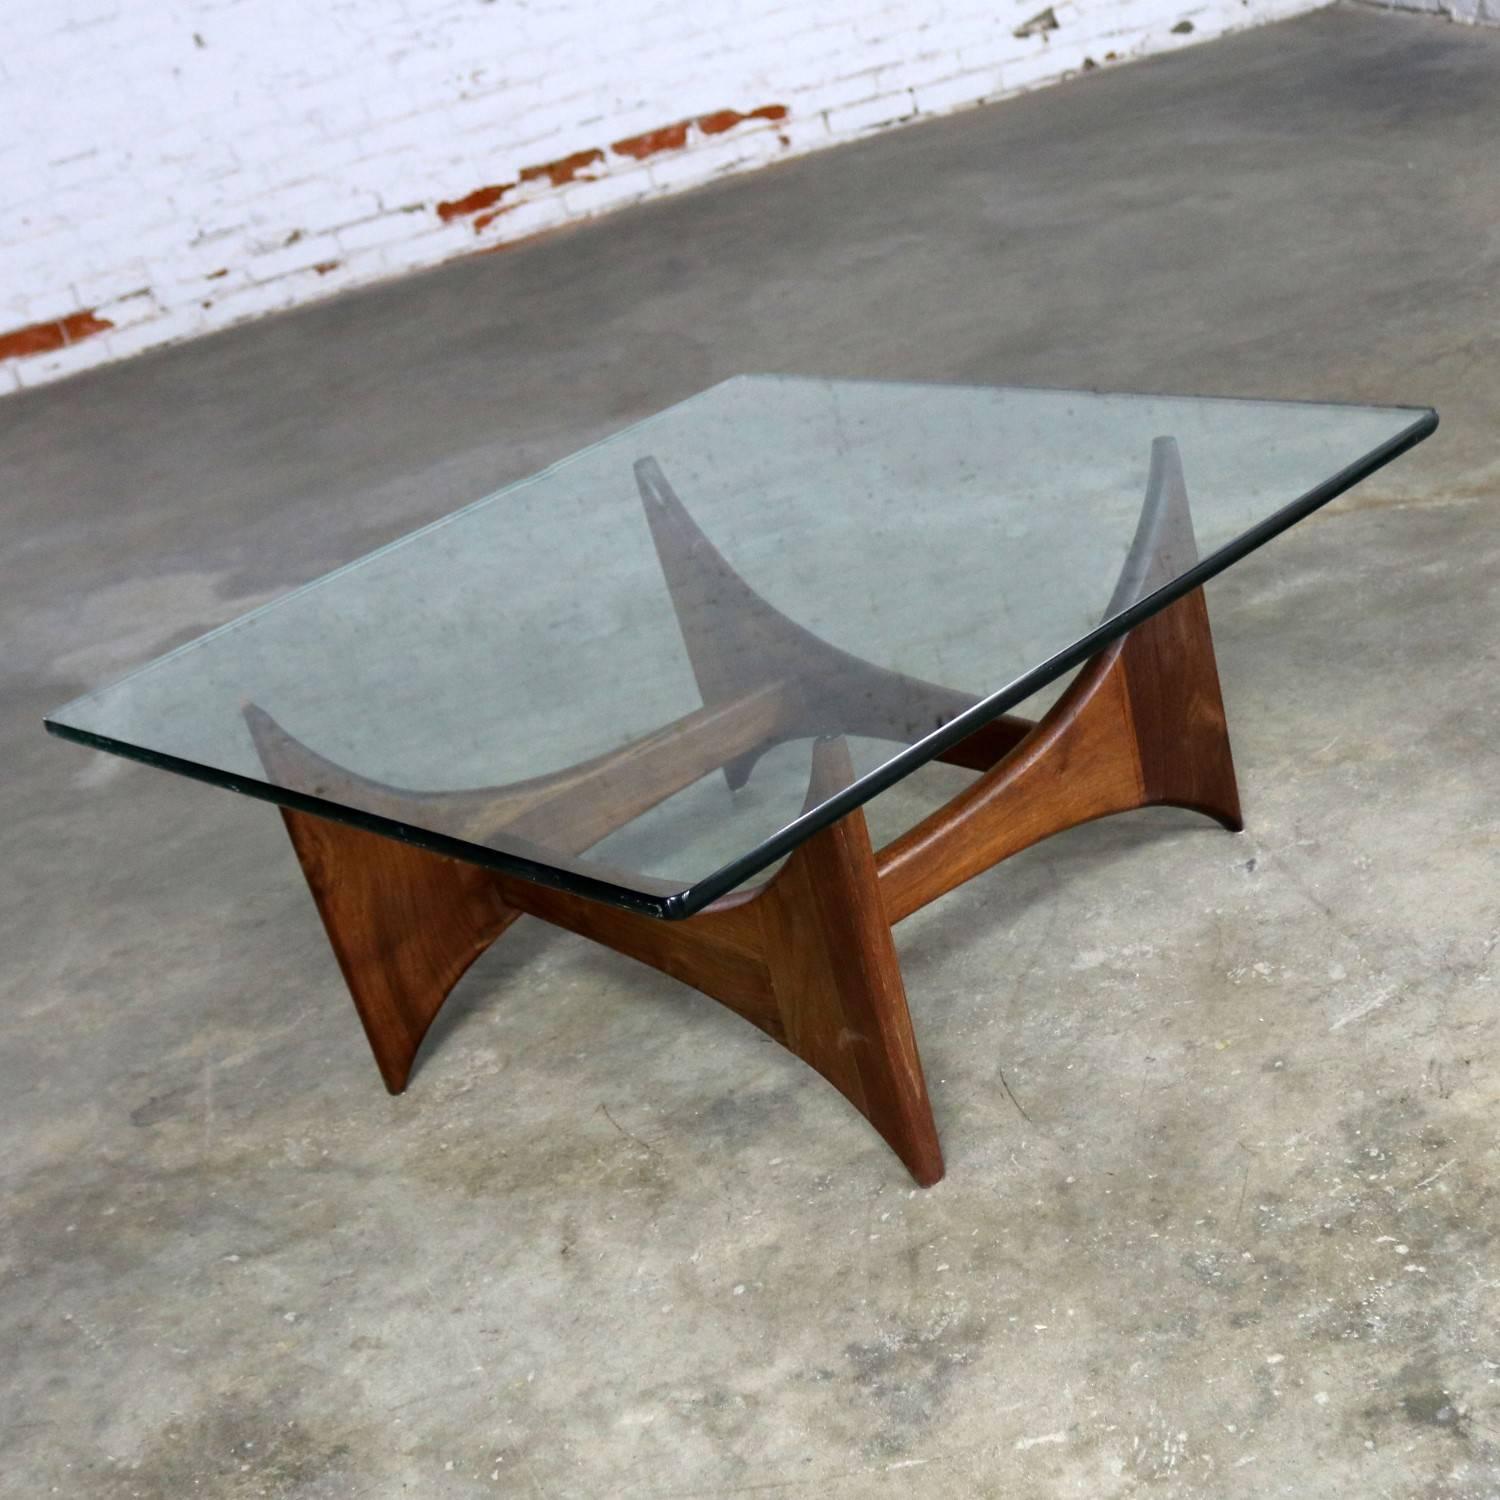 Fabulous sculptural coffee or cocktail table of walnut and glass designed by Adrian Pearsall for Craft Associates. This table is in wonderful restored condition, circa 1960s.

This stunning table is the epitome of Adrian Pearsall Mid-Century